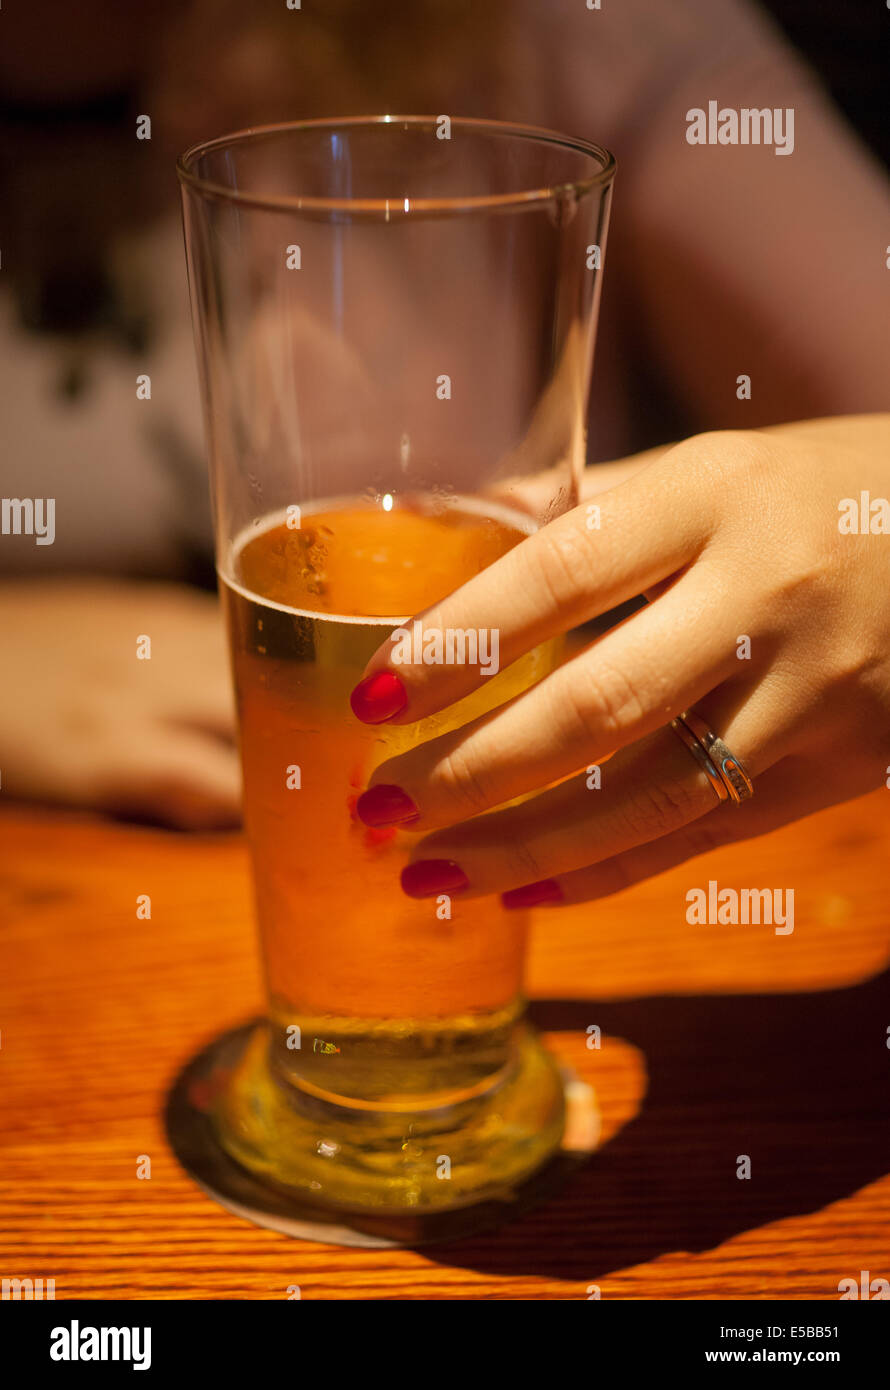 A woman's hand holding a glass of beer Stock Photo